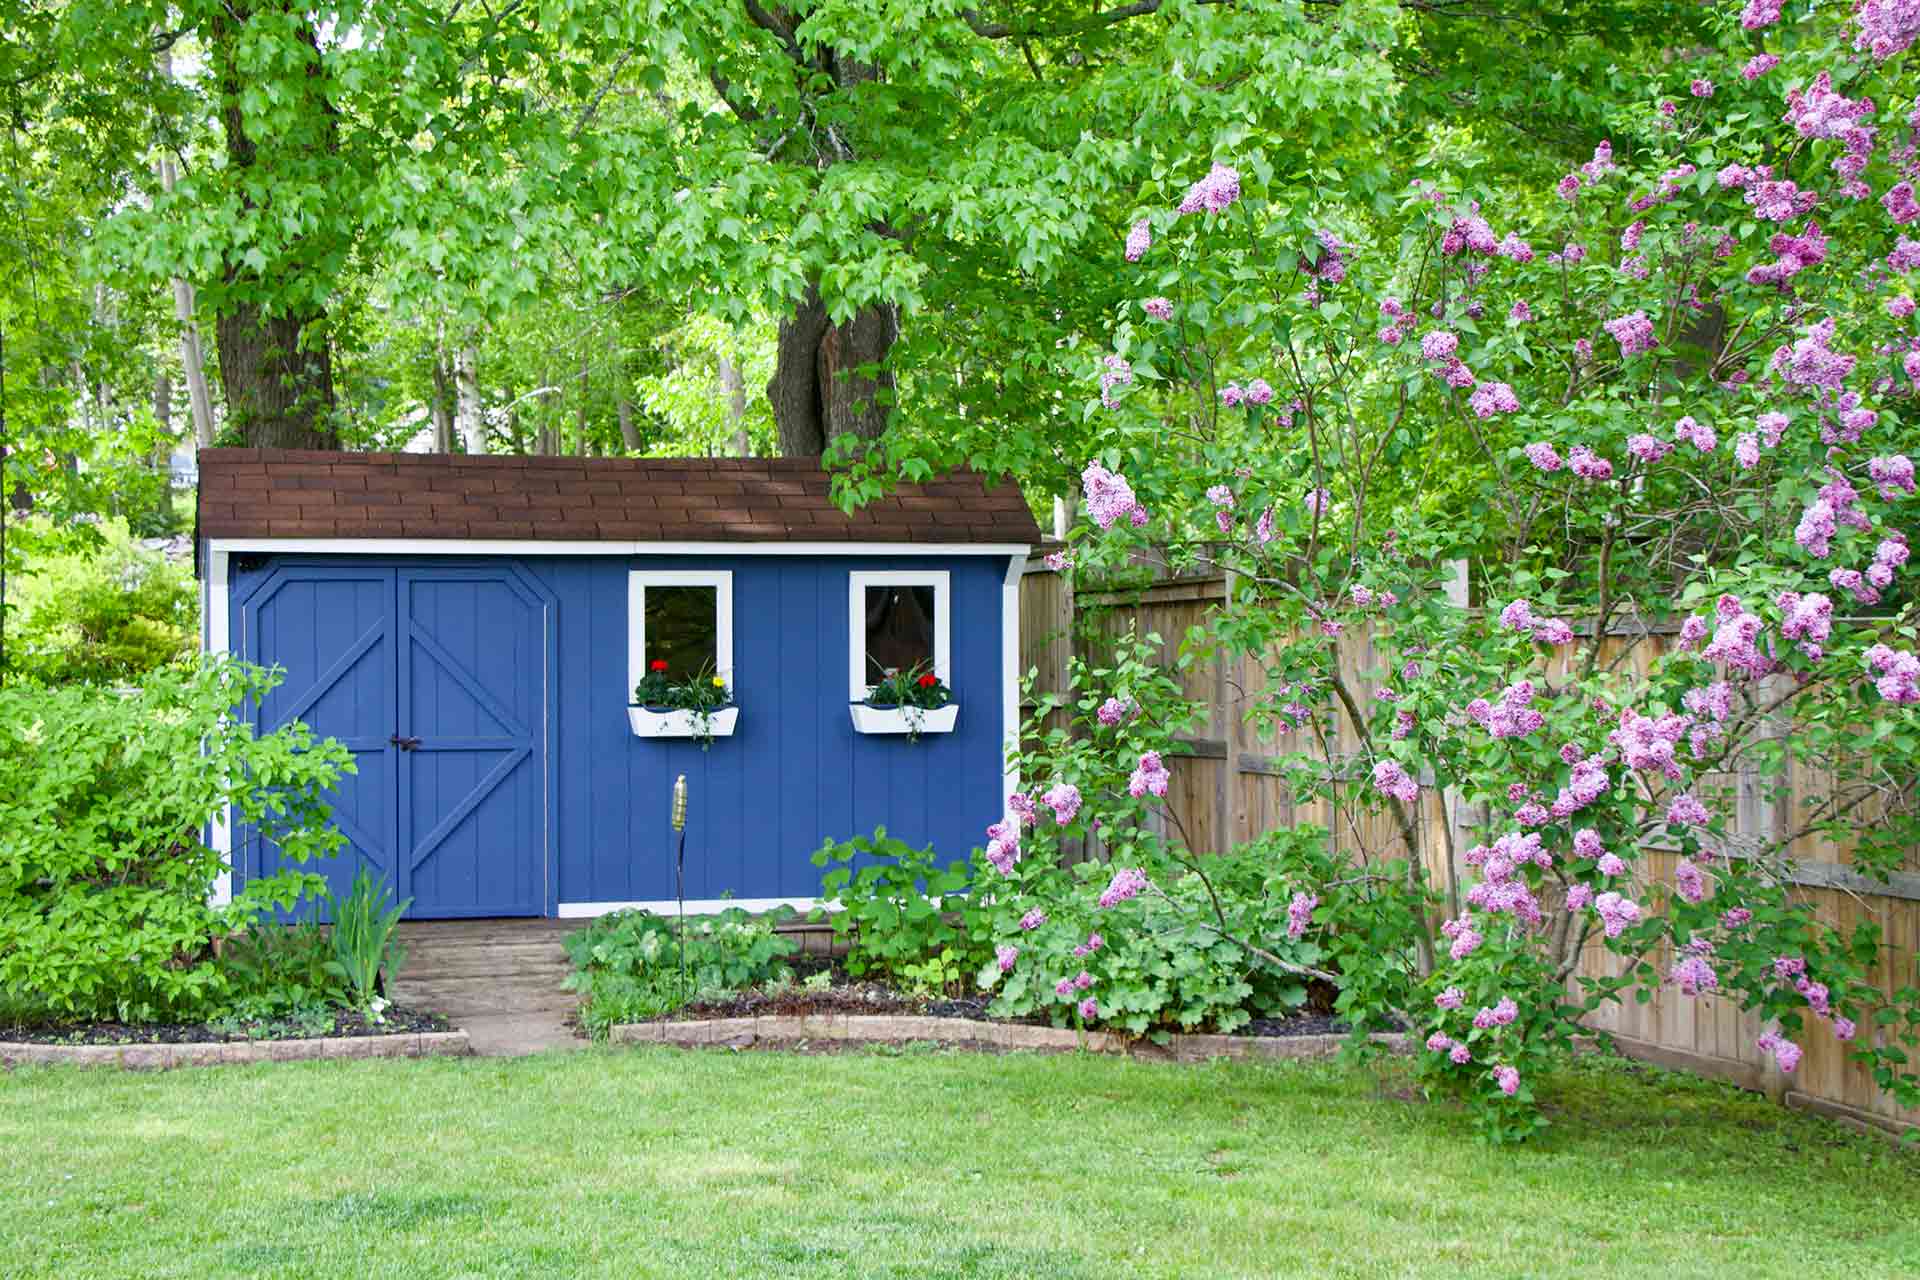 How To Paint A Shed Exterior